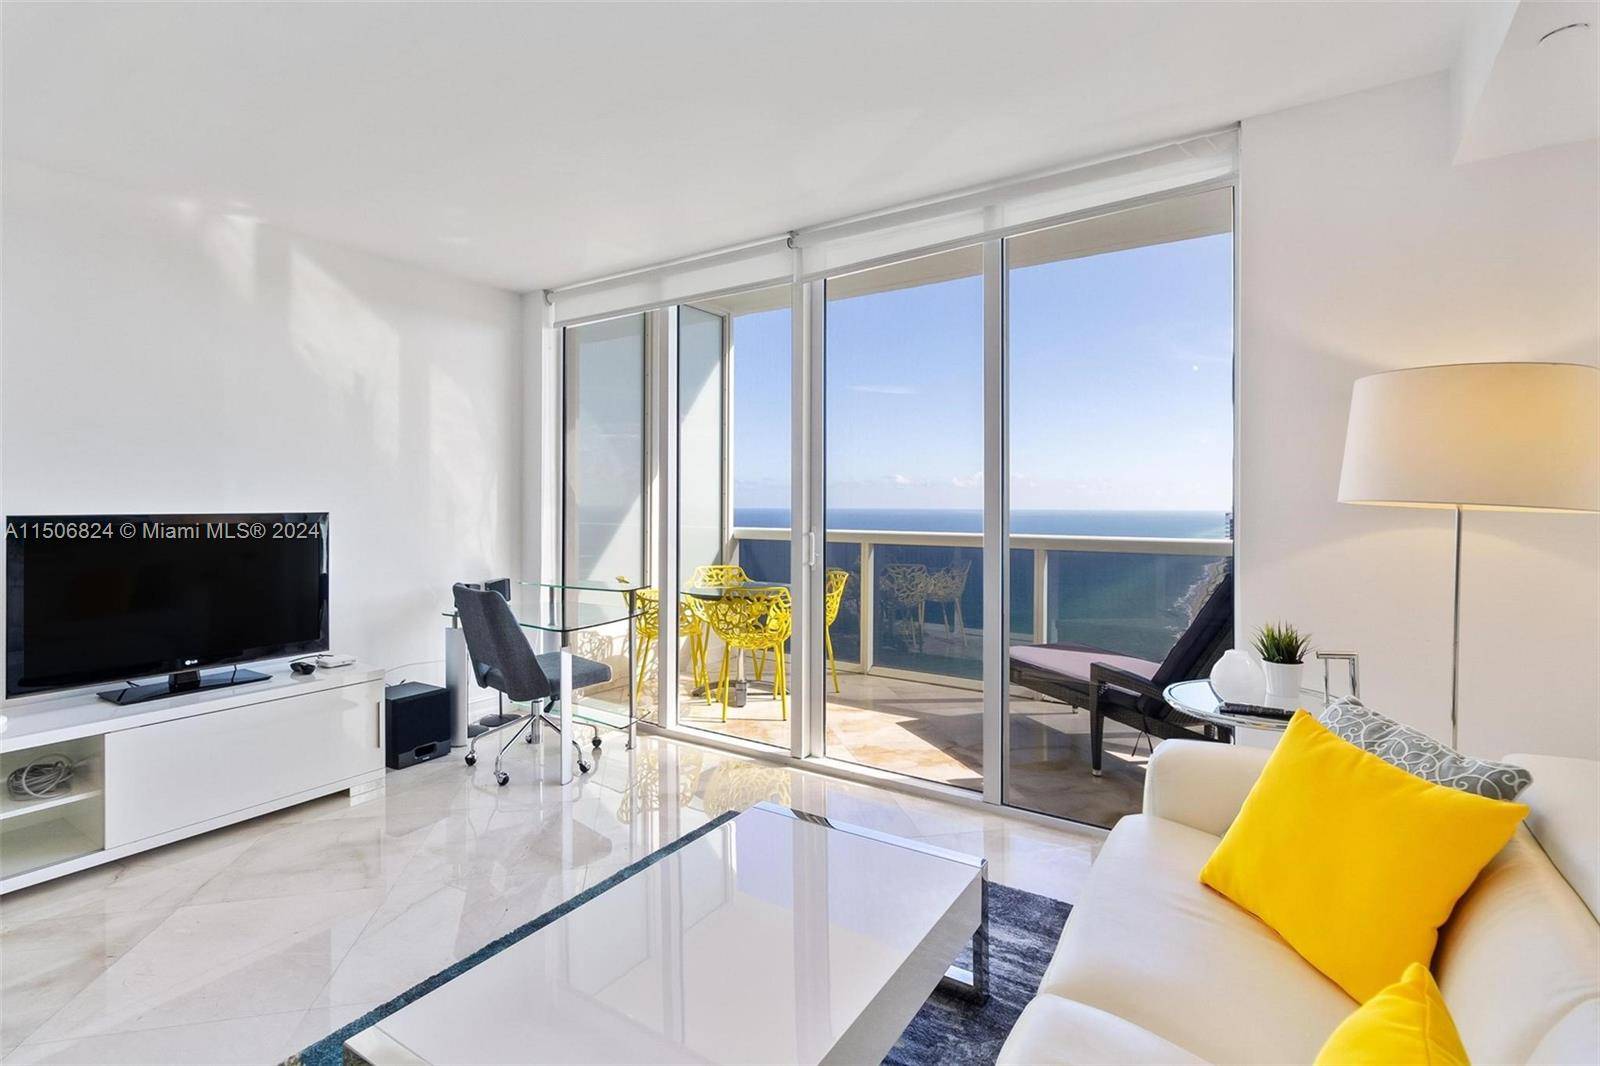 Experience the epitome of luxury in this exquisite studio plus den PH, featuring 1 bathroom, captivating SE exposure, and breathtaking ocean views.